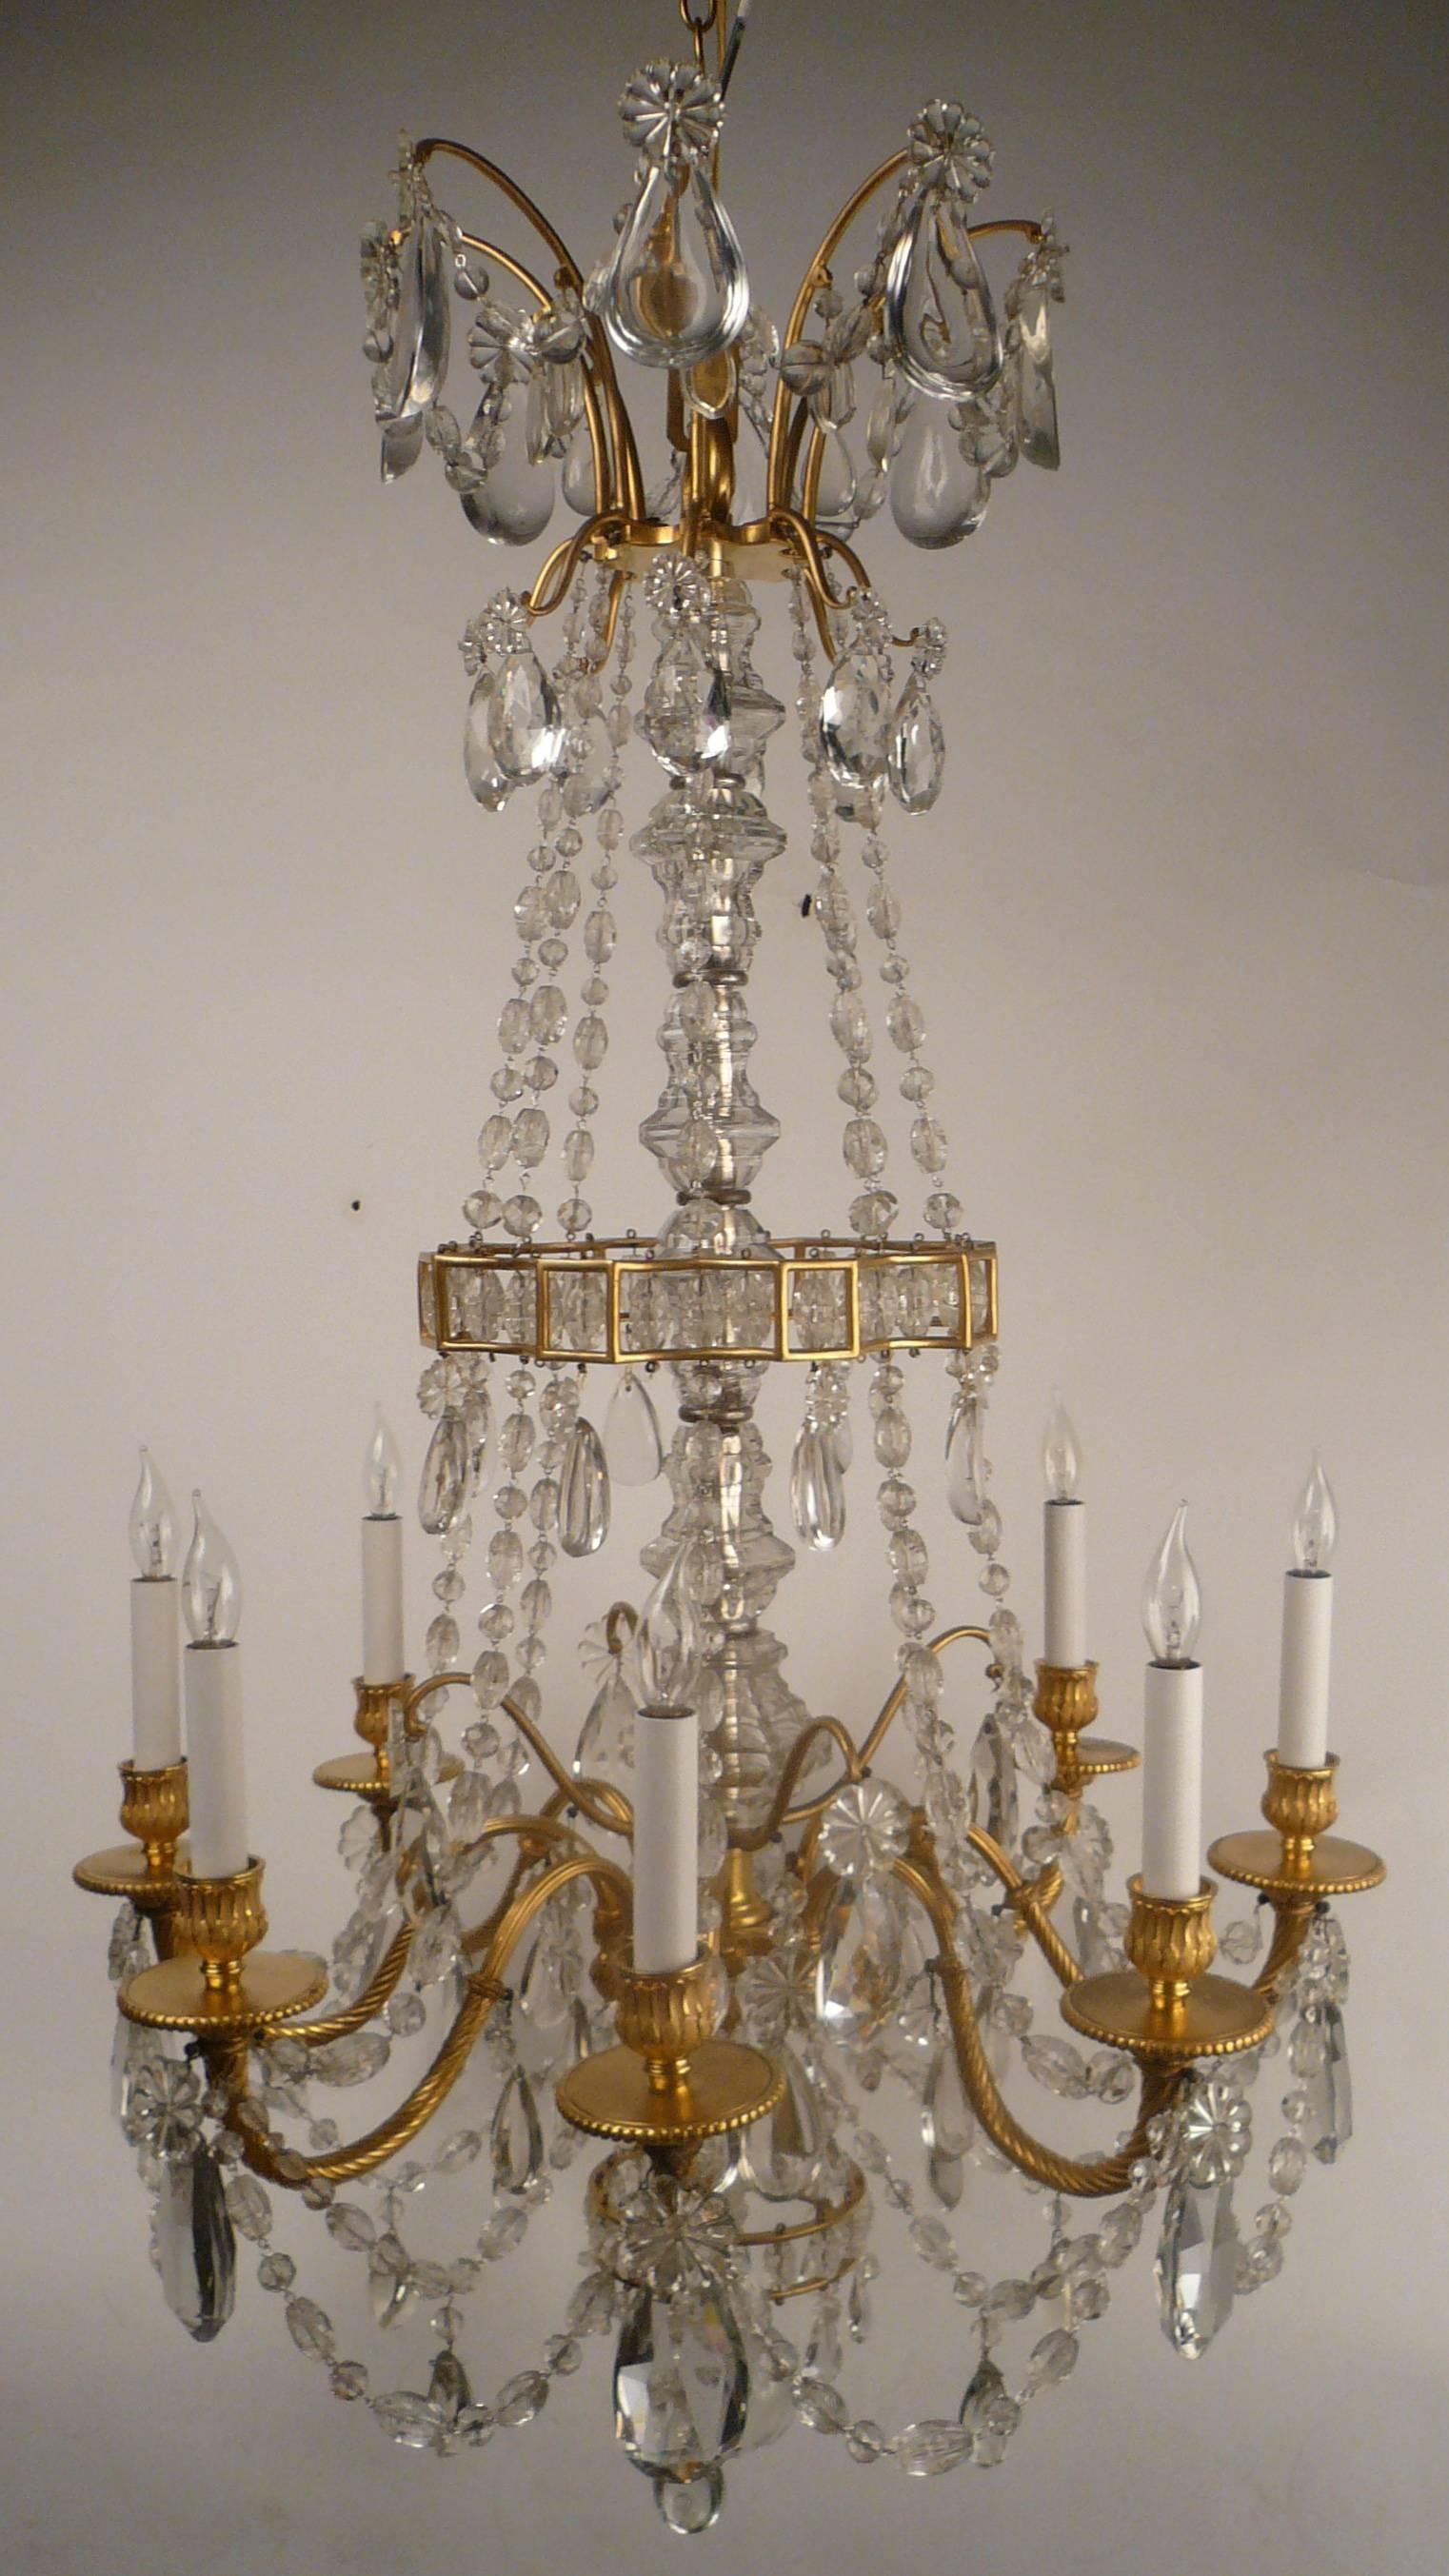 This Baccarat quality fixture is beautifully cast and hand chased in gilt bronze, and the prisms are of the finest quality. It was made in France, and retailed by Edward F. Caldwell.